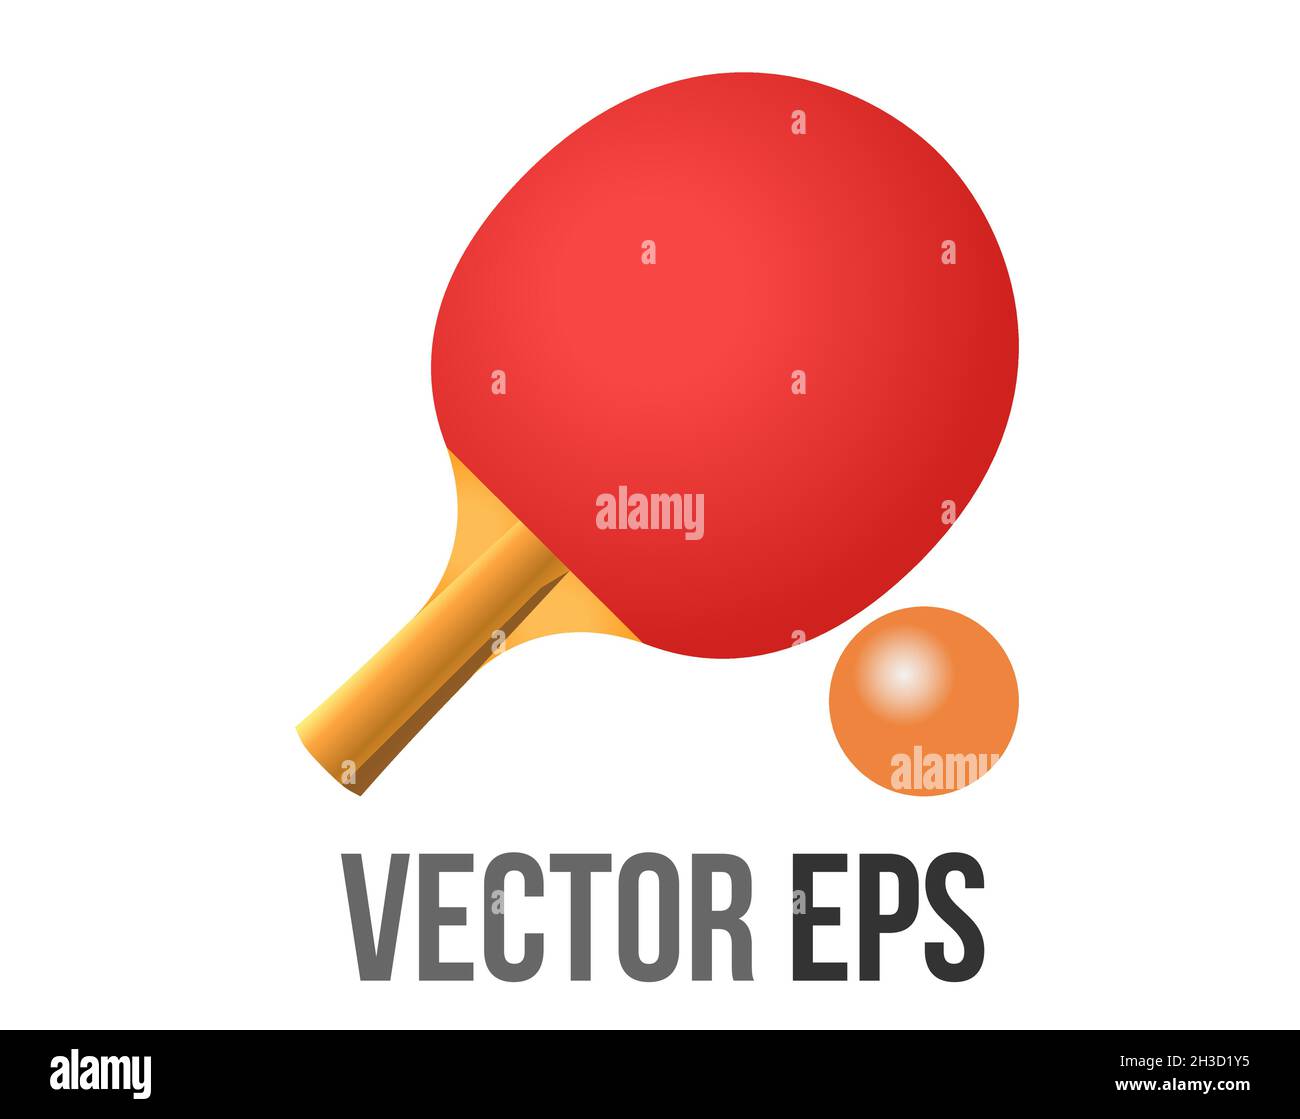 The isolated vector table tennis paddle icon with red rubber surface and ping pong ball Stock Vector